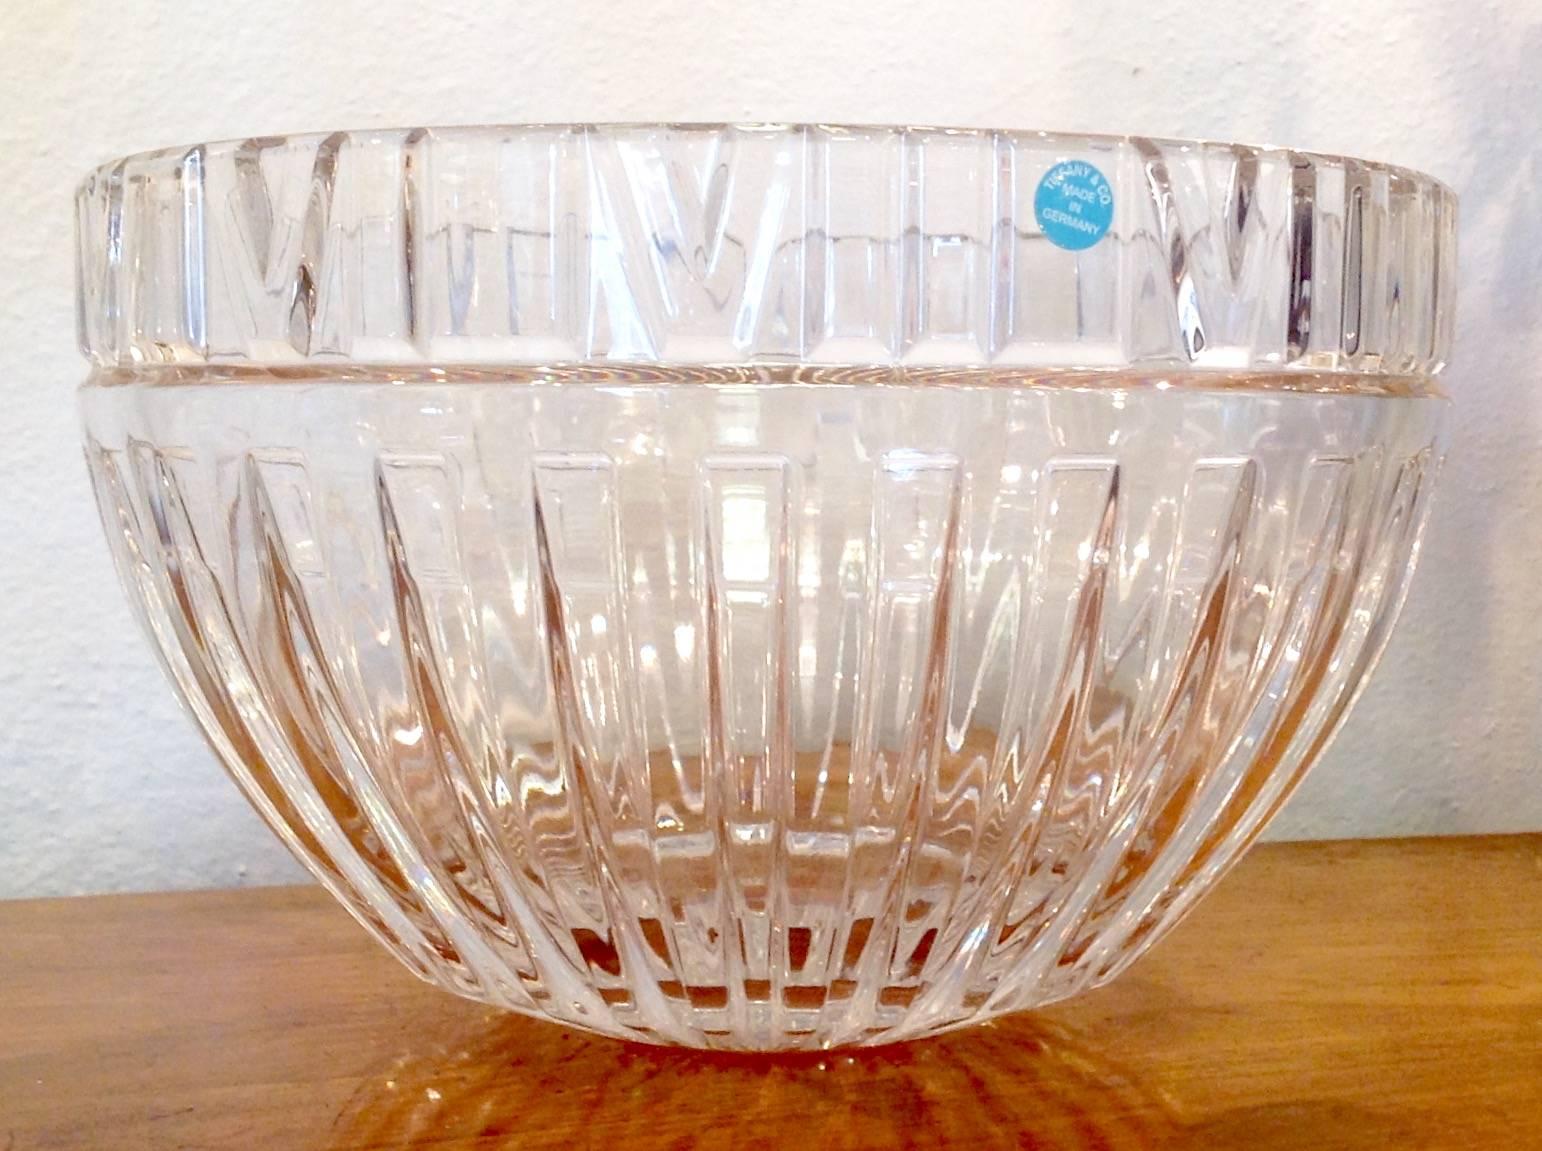 Tiffany & Co. Crystal serving bowl, salad bowl or decorative bowl. Measures 6 inches high and 9.75 inches wide. Signed Tiffany & Co. on bottom.  In excellent condition. 